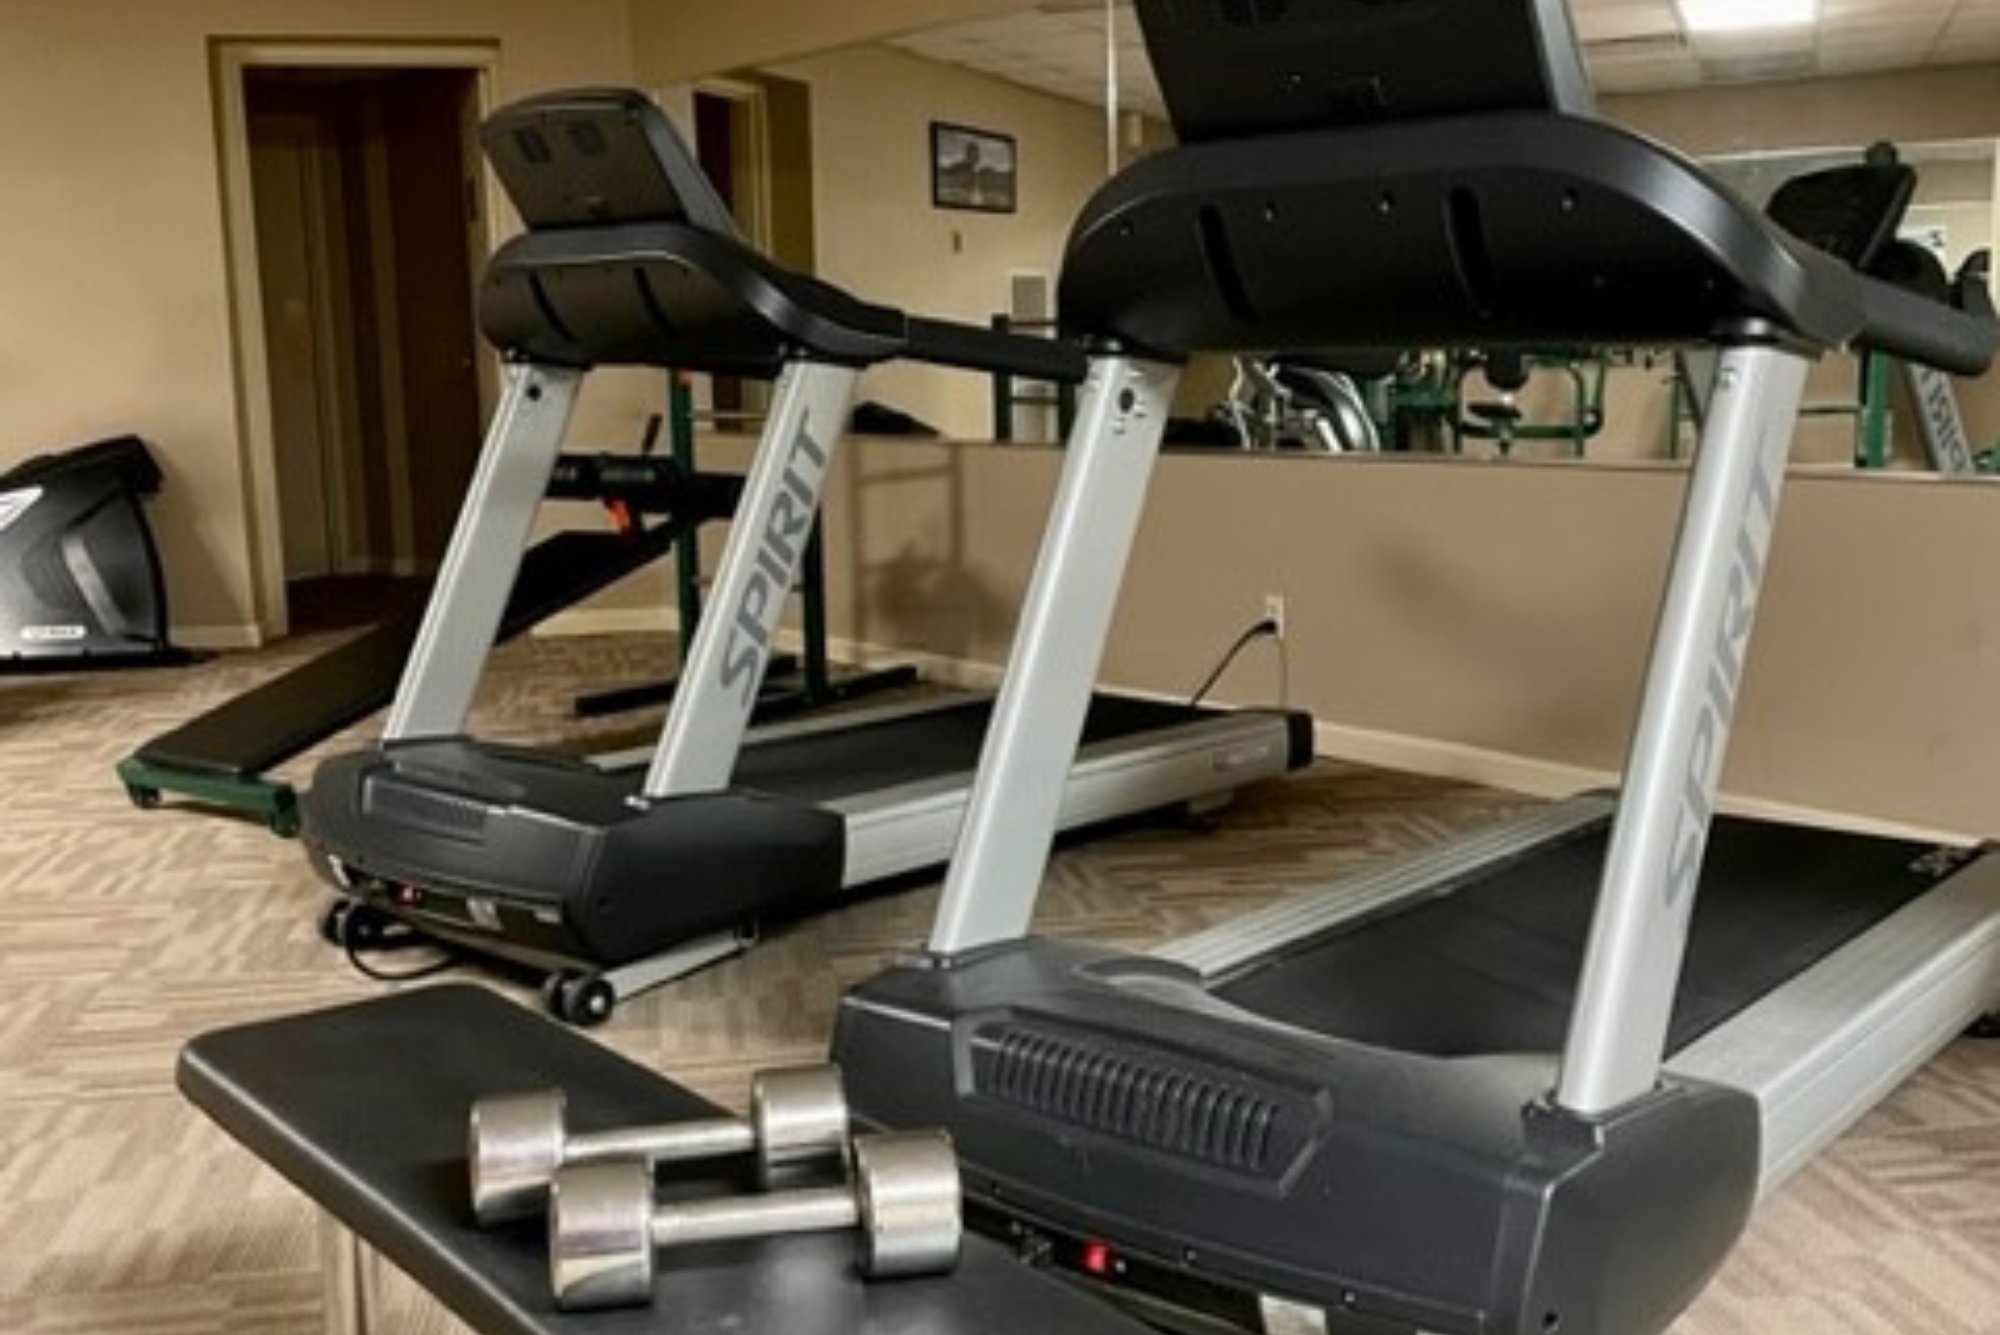 Fitness room photo showing treadmills and weights